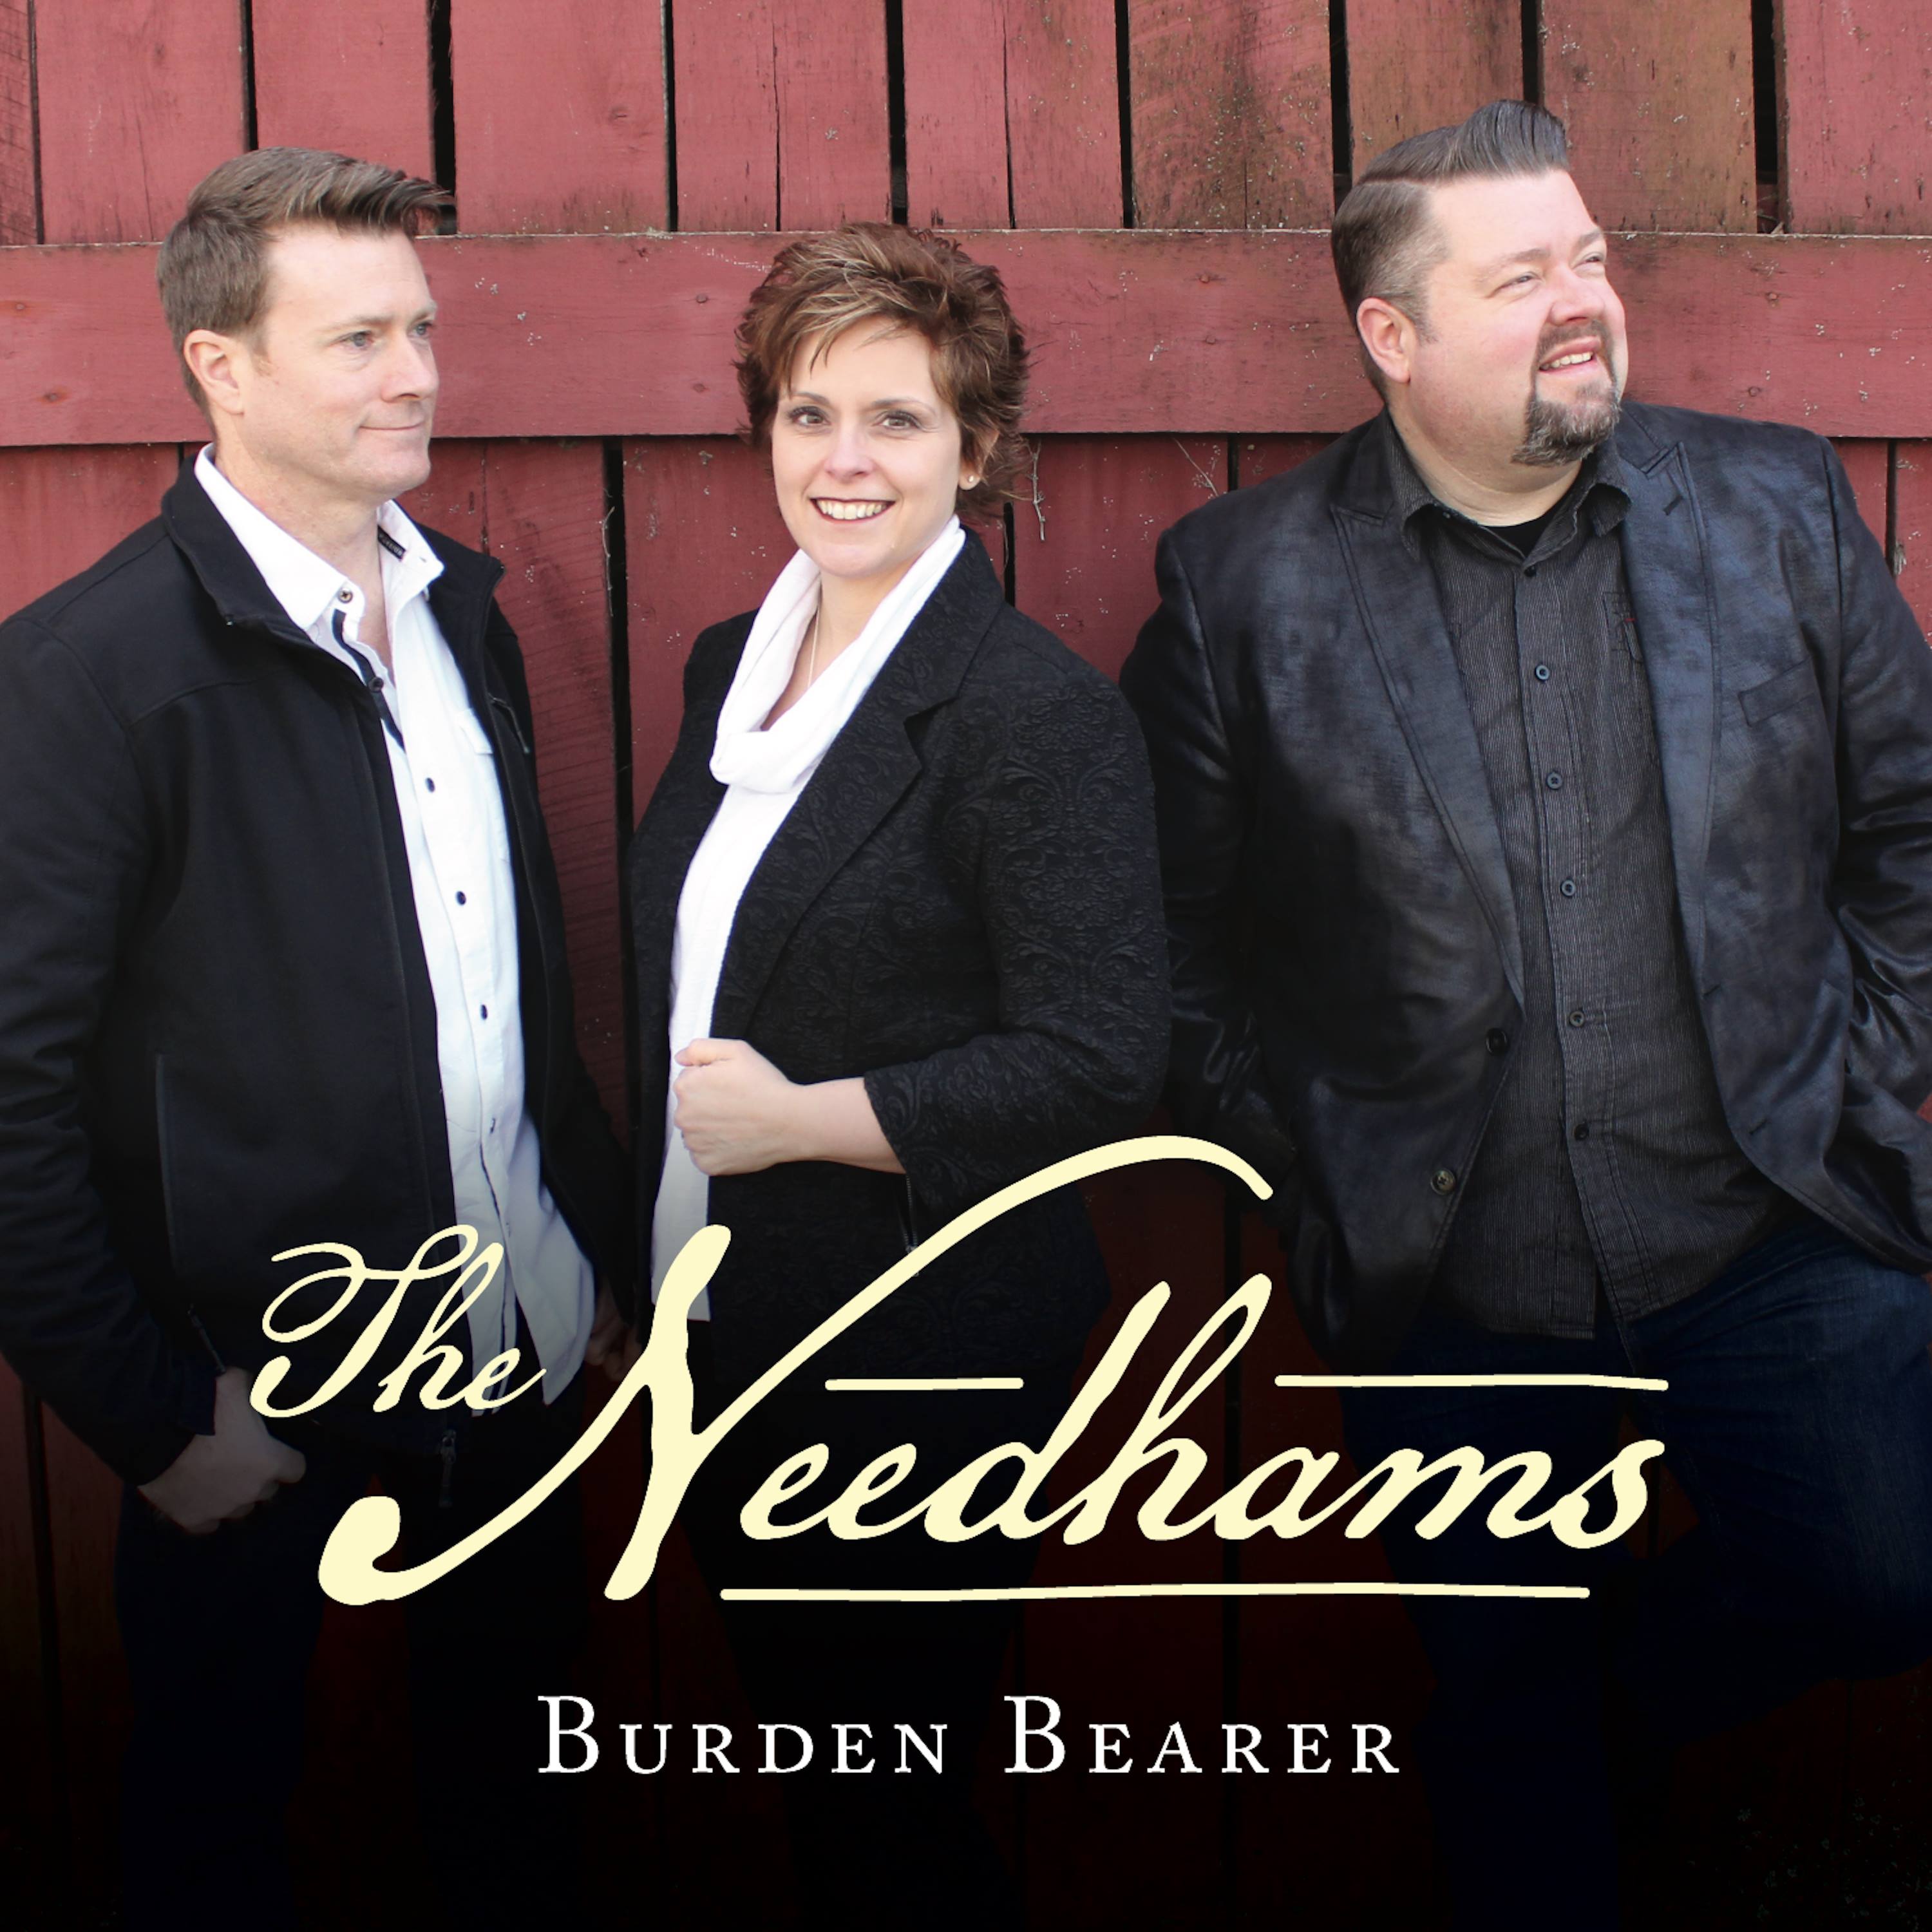 The Needhams announce the release of their brand Album